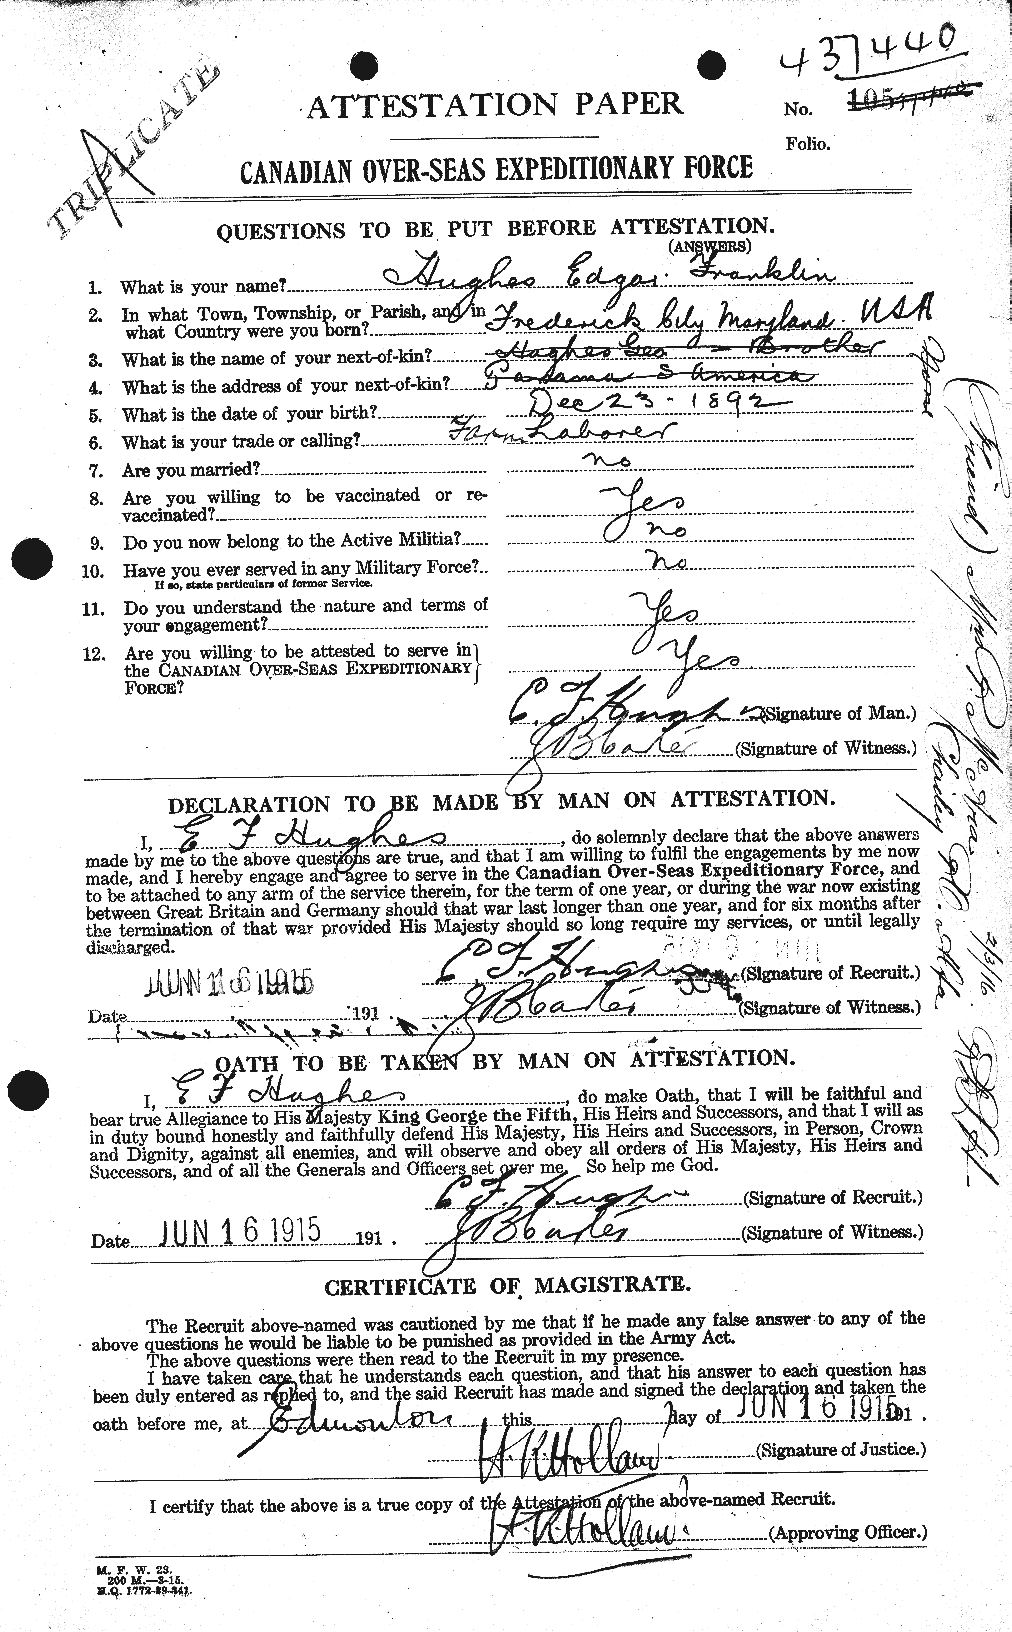 Personnel Records of the First World War - CEF 402659a